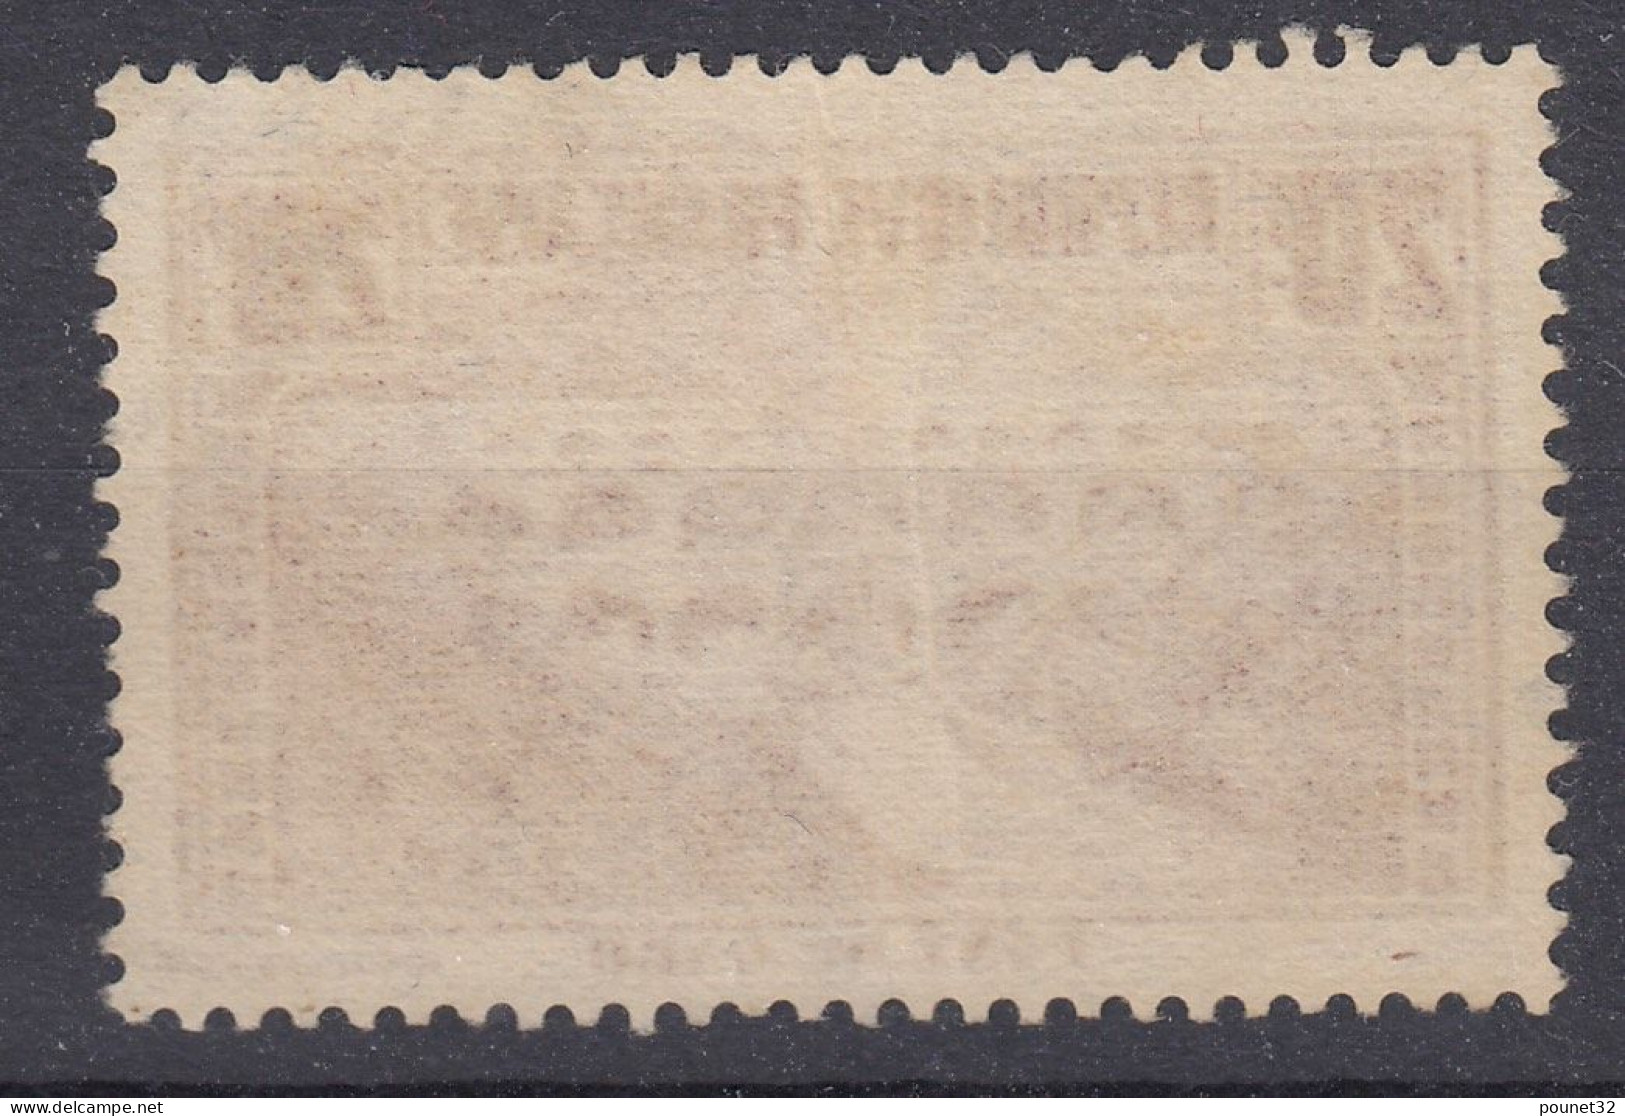 TIMBRE FRANCE PONT DU GARD N° 262c TYPE IIA OBLITERATION LEGERE - A VOIR ( PLI ) - Used Stamps